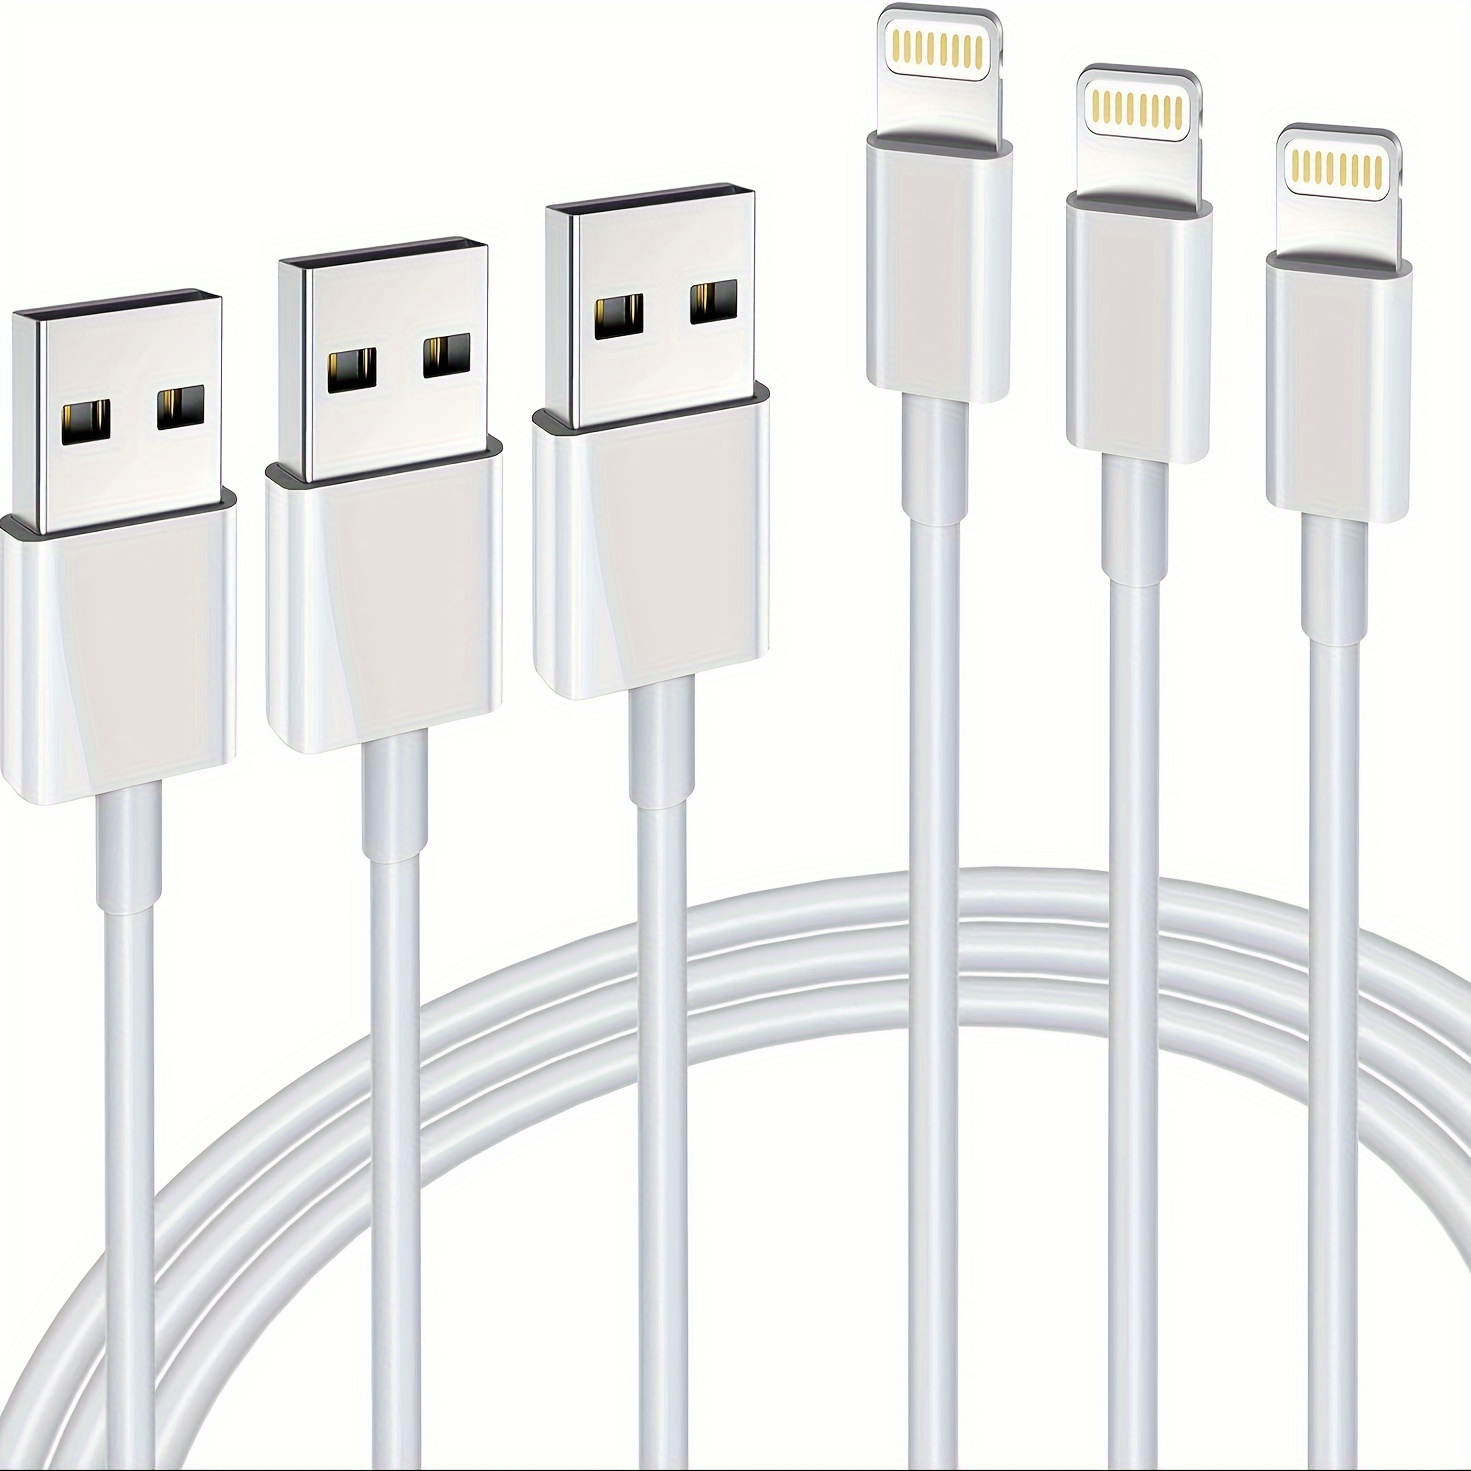 Cable USB Tipo C, 4Pack [ 0.5M 1M 2M 3M] 3.1A Cargador Tipo C Nylon